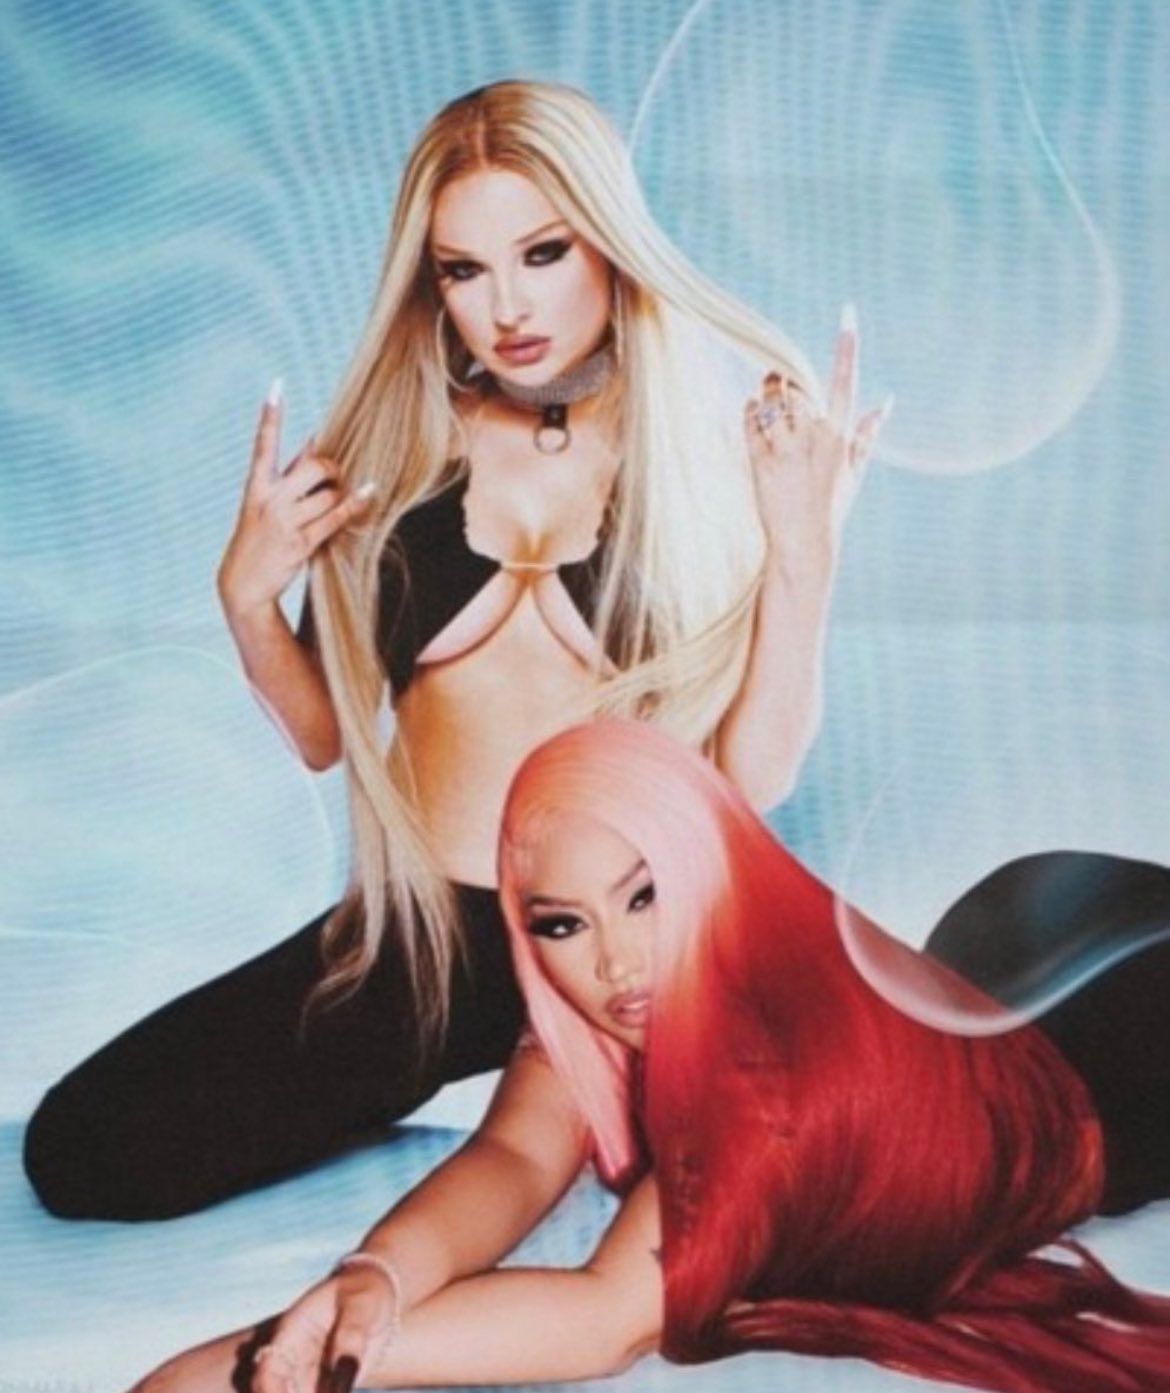 Kim Petras On Living Her Dream Of Working With Nicki Minaj, ‘Unholy’ And Her Top 10 Slutty Songs Of All Time